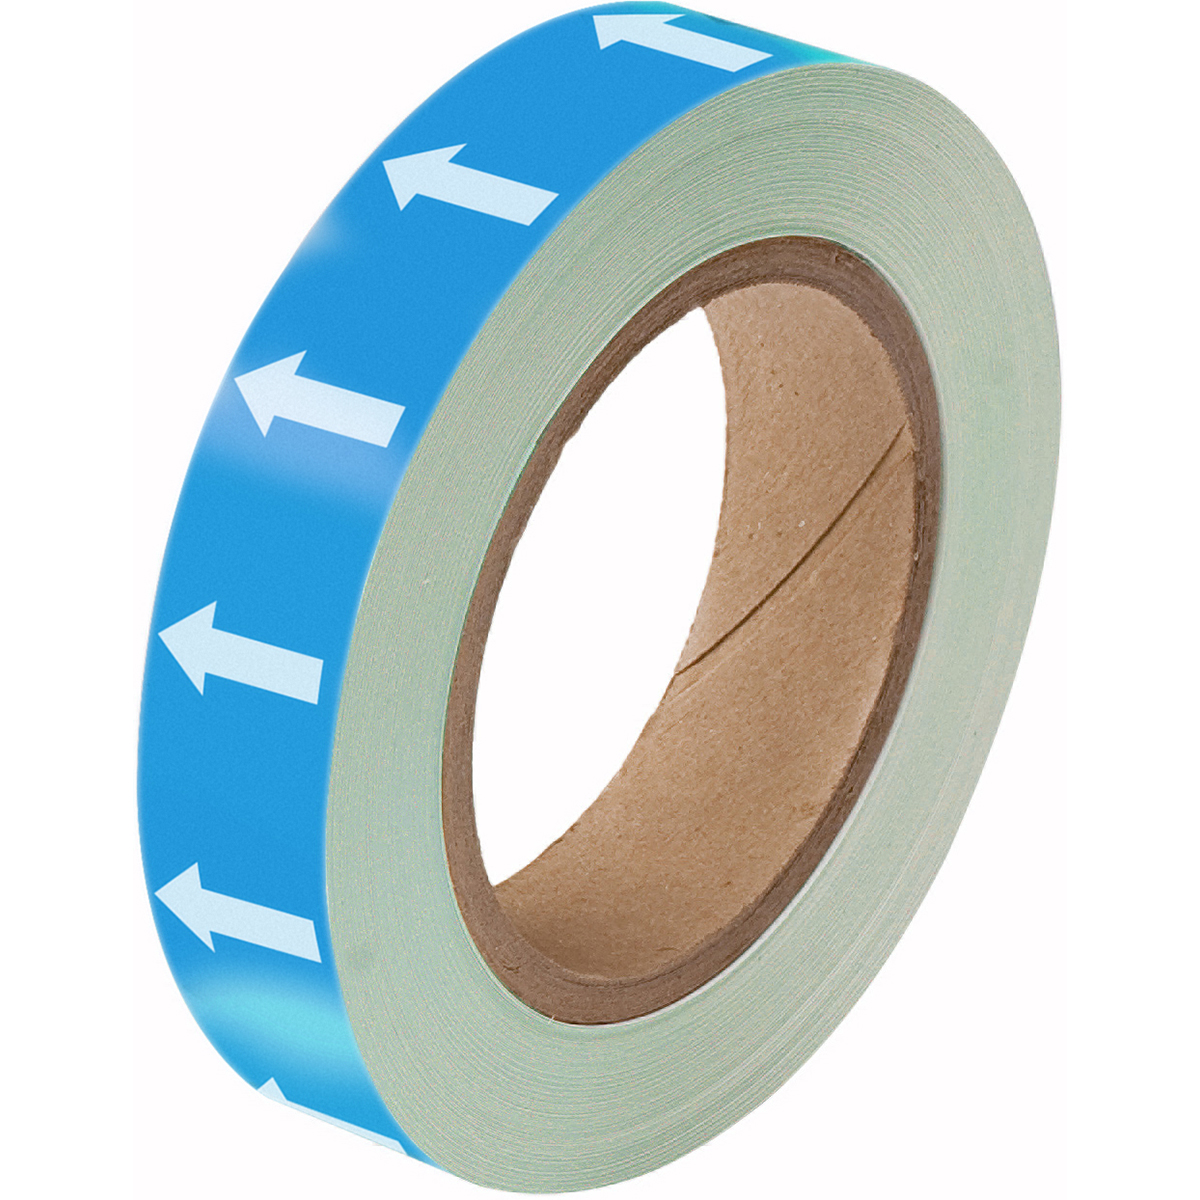 White on Blue Directional arrow Tape